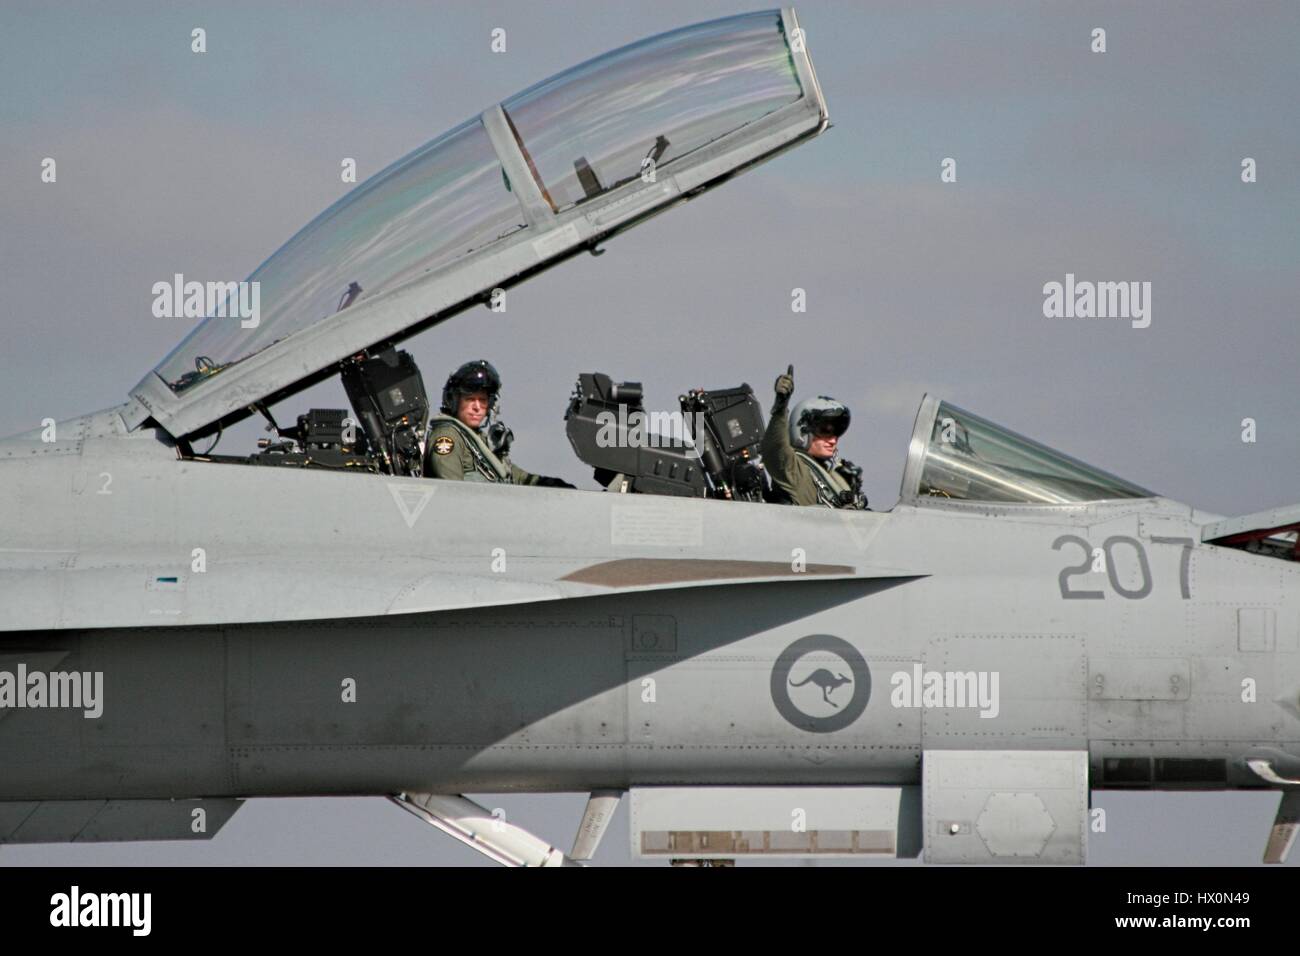 F/A-18F Super Hornet on the runway at Avalon airshow, Australia, canopy open, pilots giving thumbs up. Stock Photo